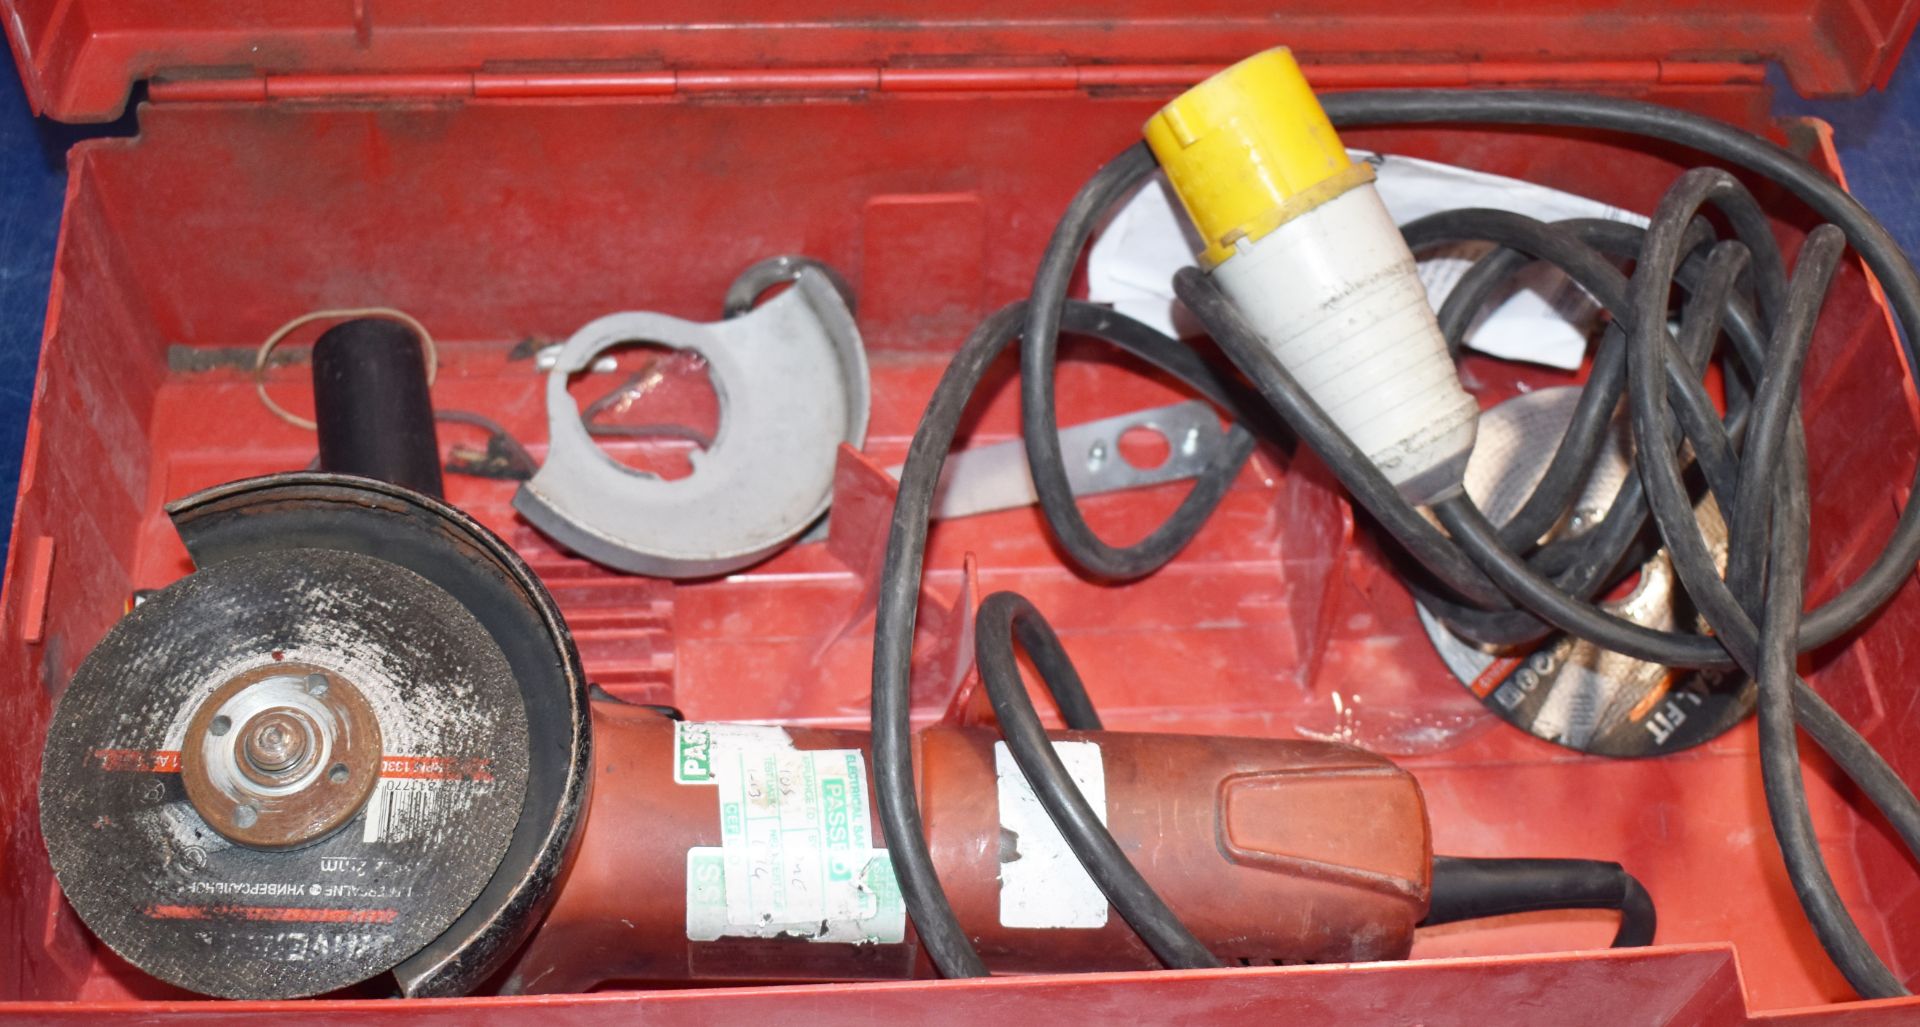 1 x Hilti DC 125S 110v Angle Grinder With Case PME128